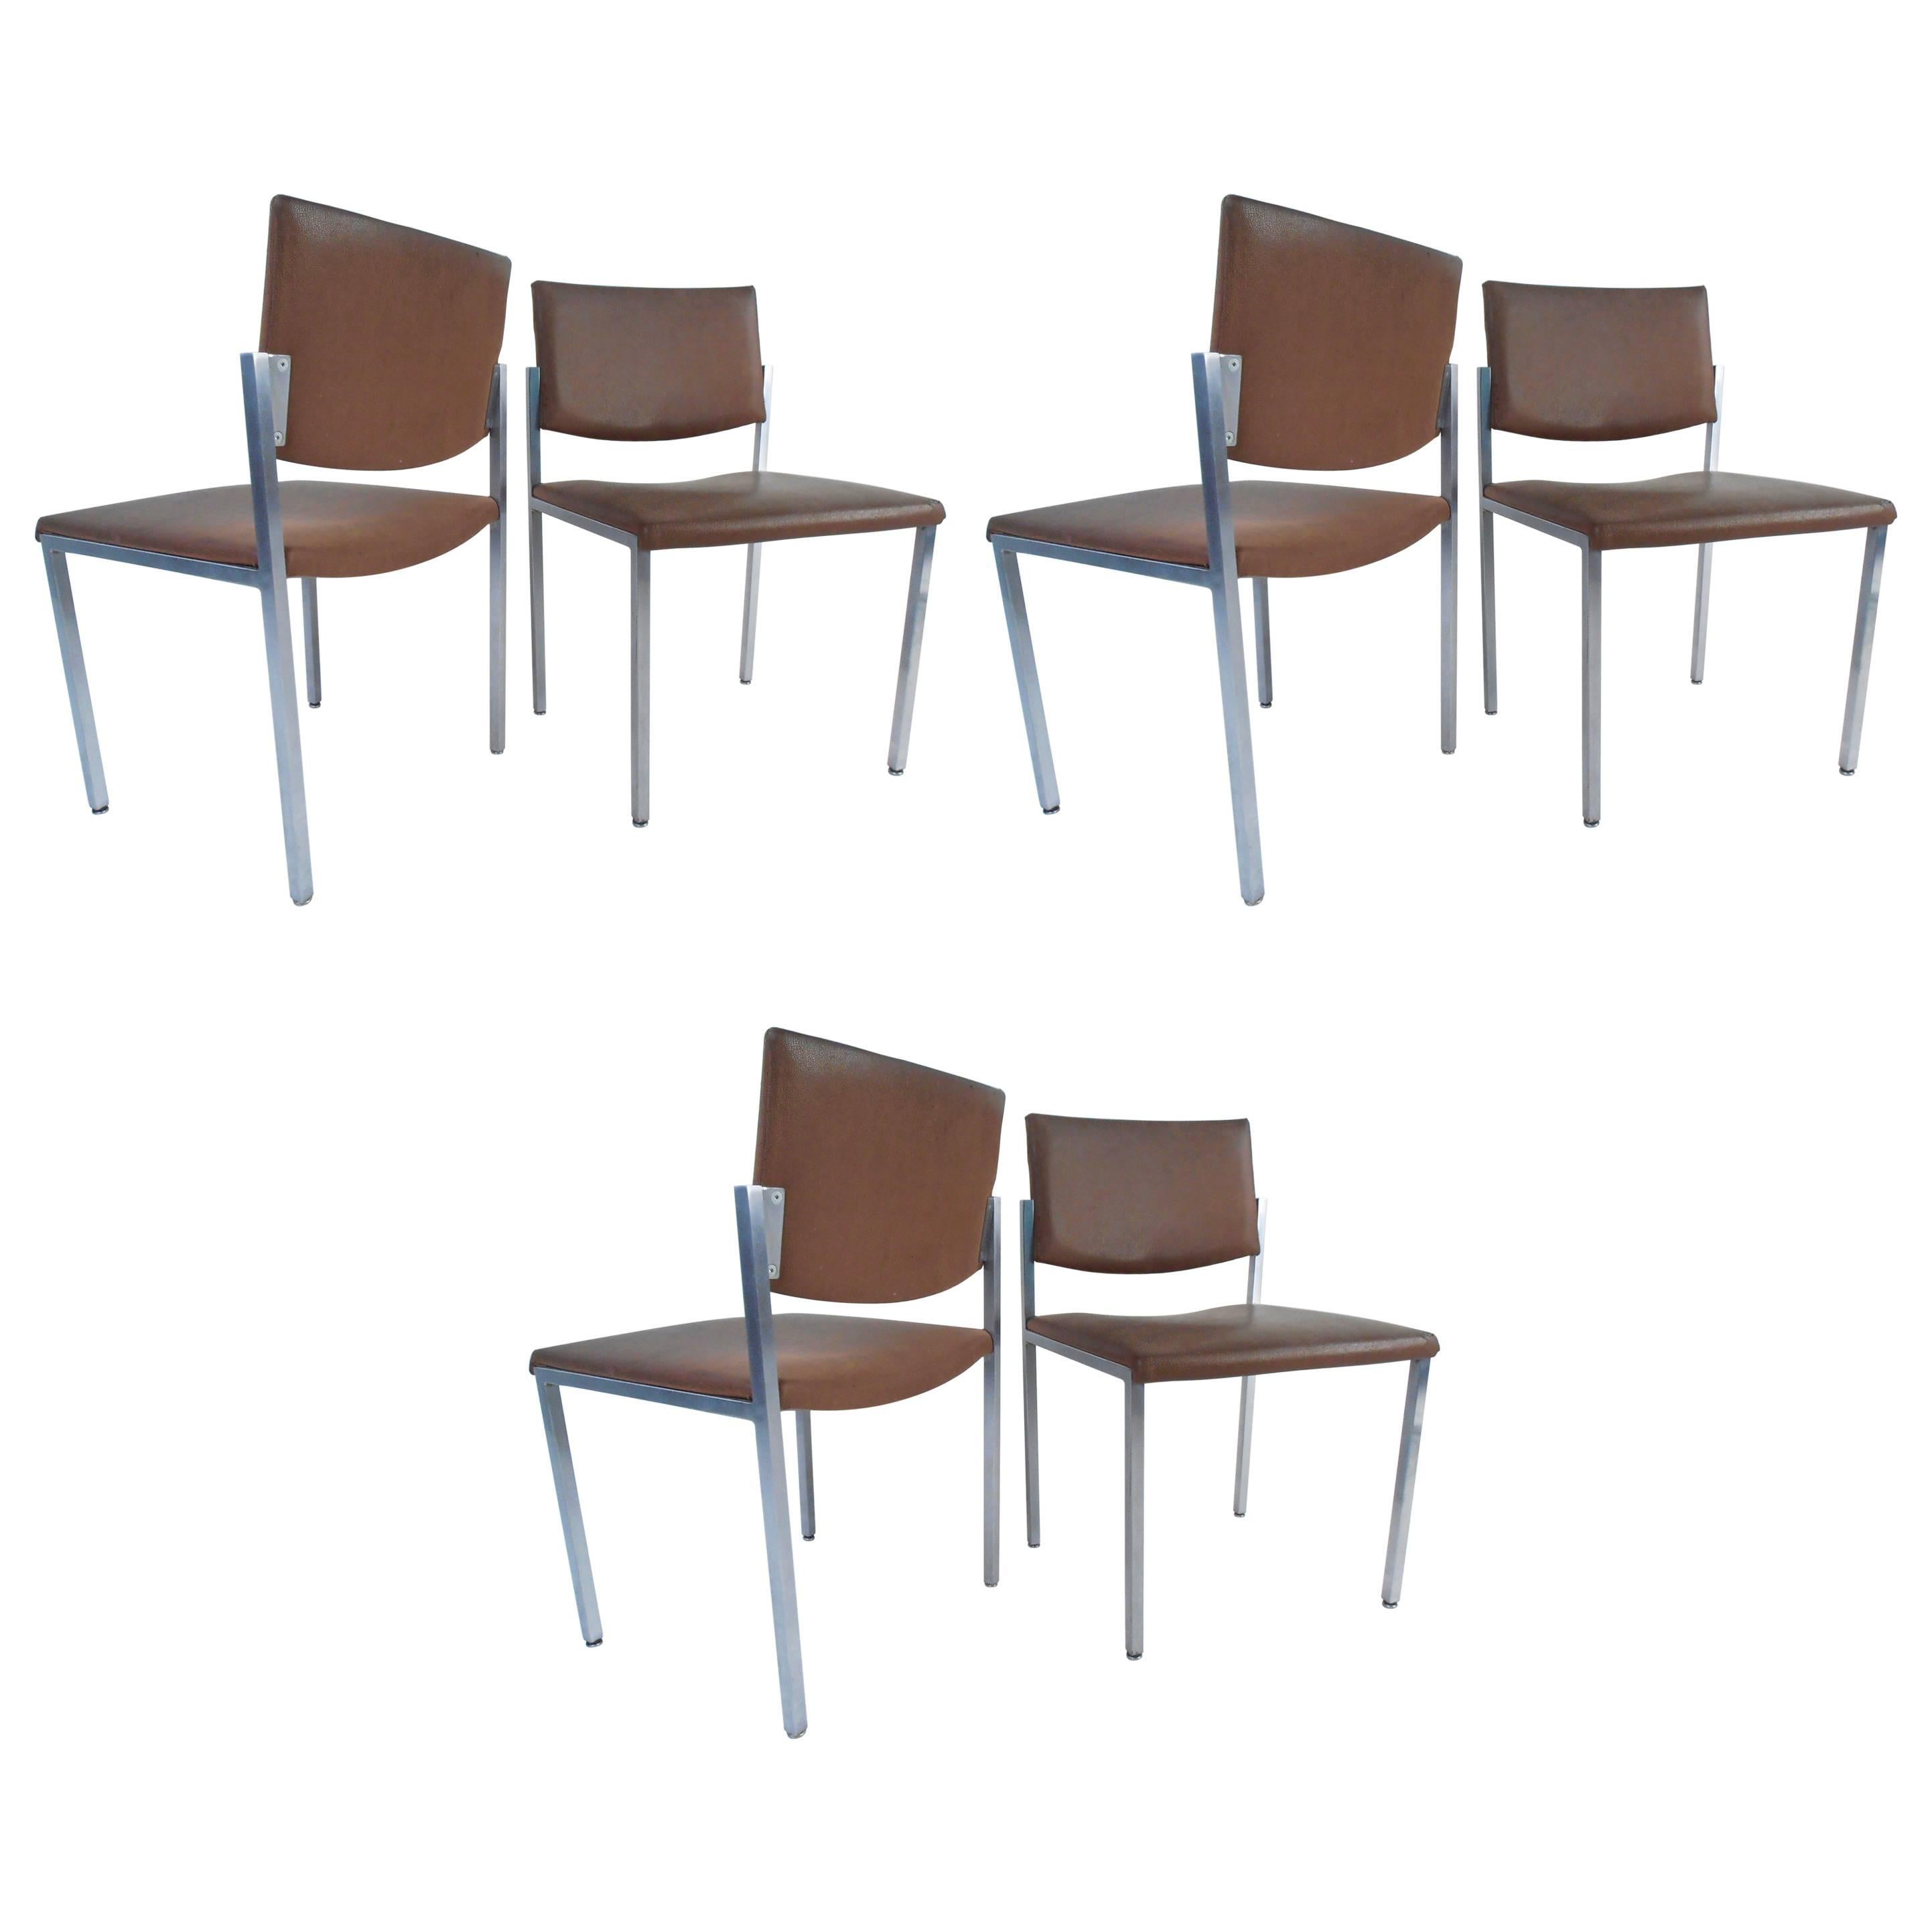 Set of Mid-Century Modern Conference Chairs by Steelcase